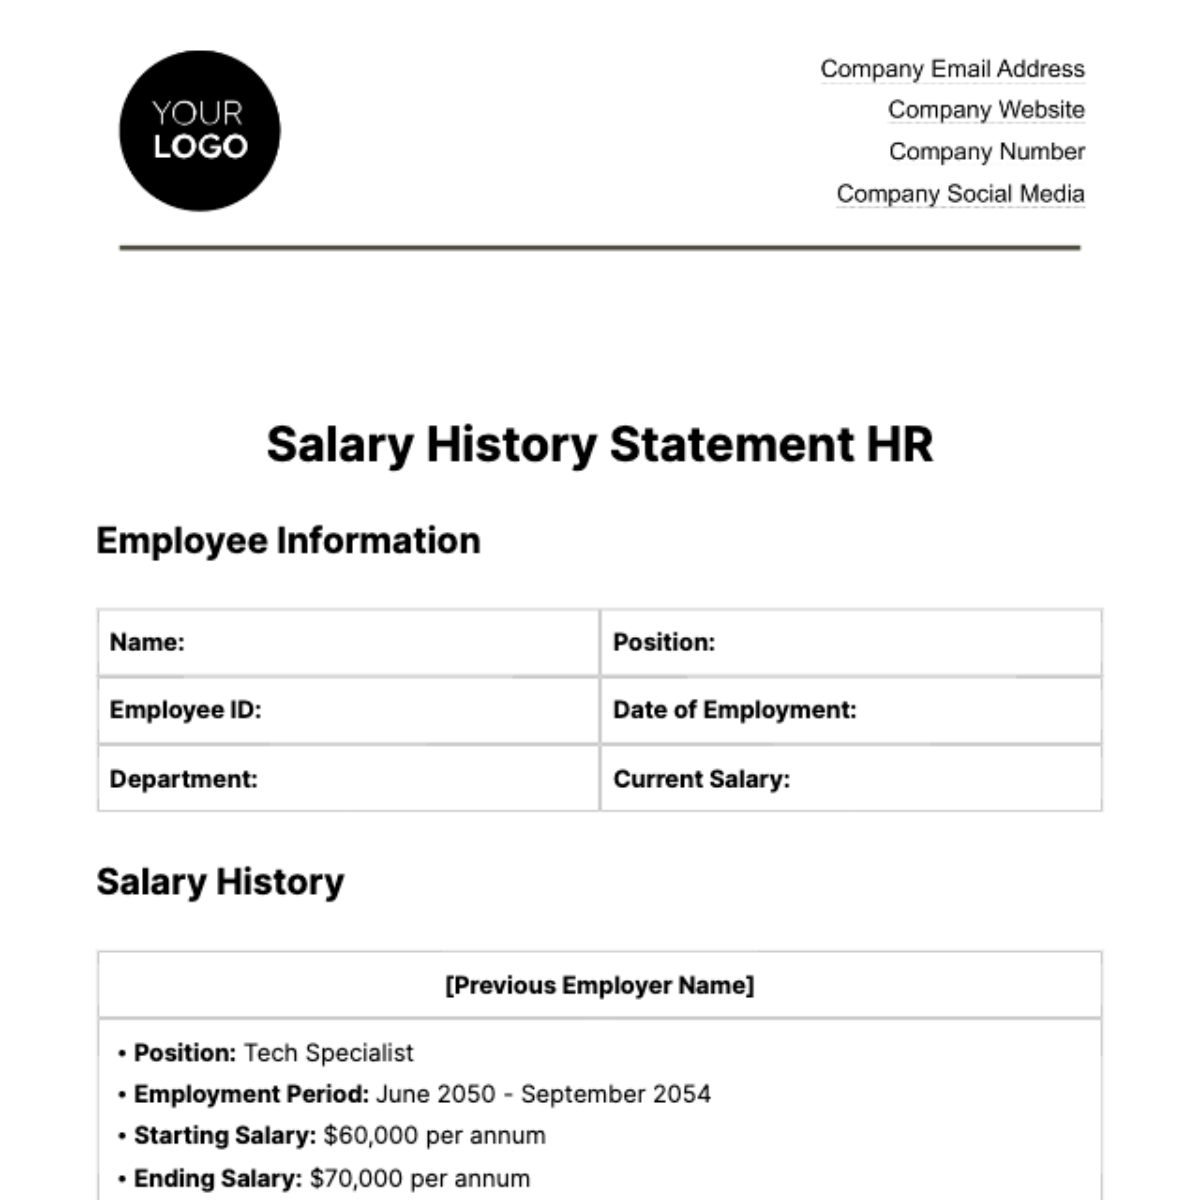 Free Salary History Statement HR Template